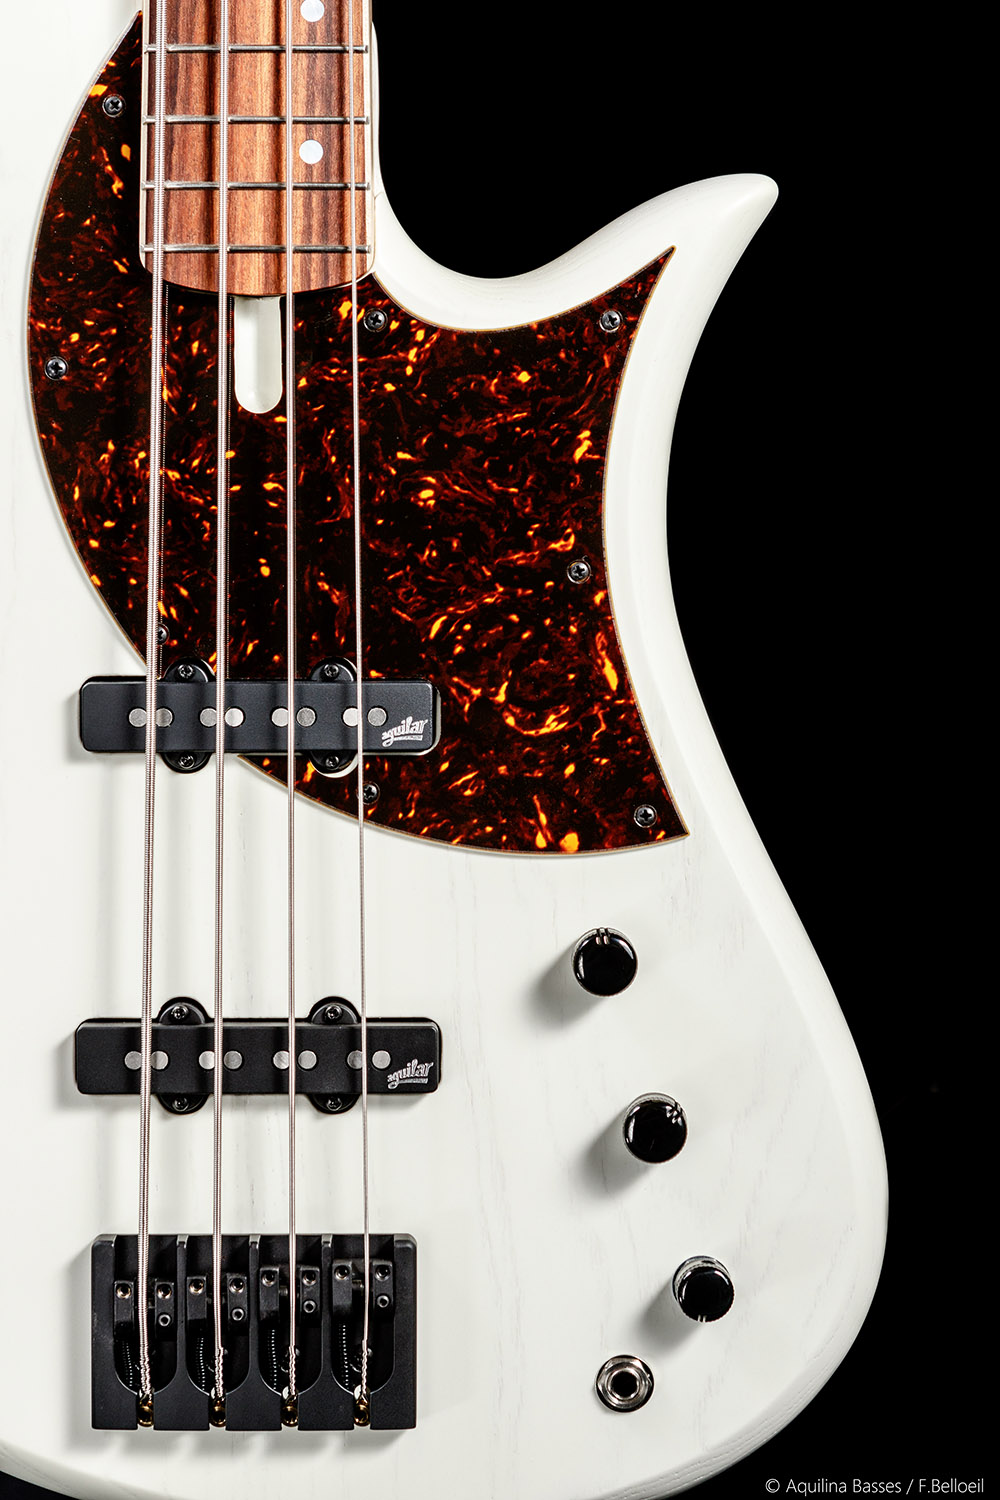 Aquilina Sirius 4 Standard Rw - White - Solid body electric bass - Variation 5